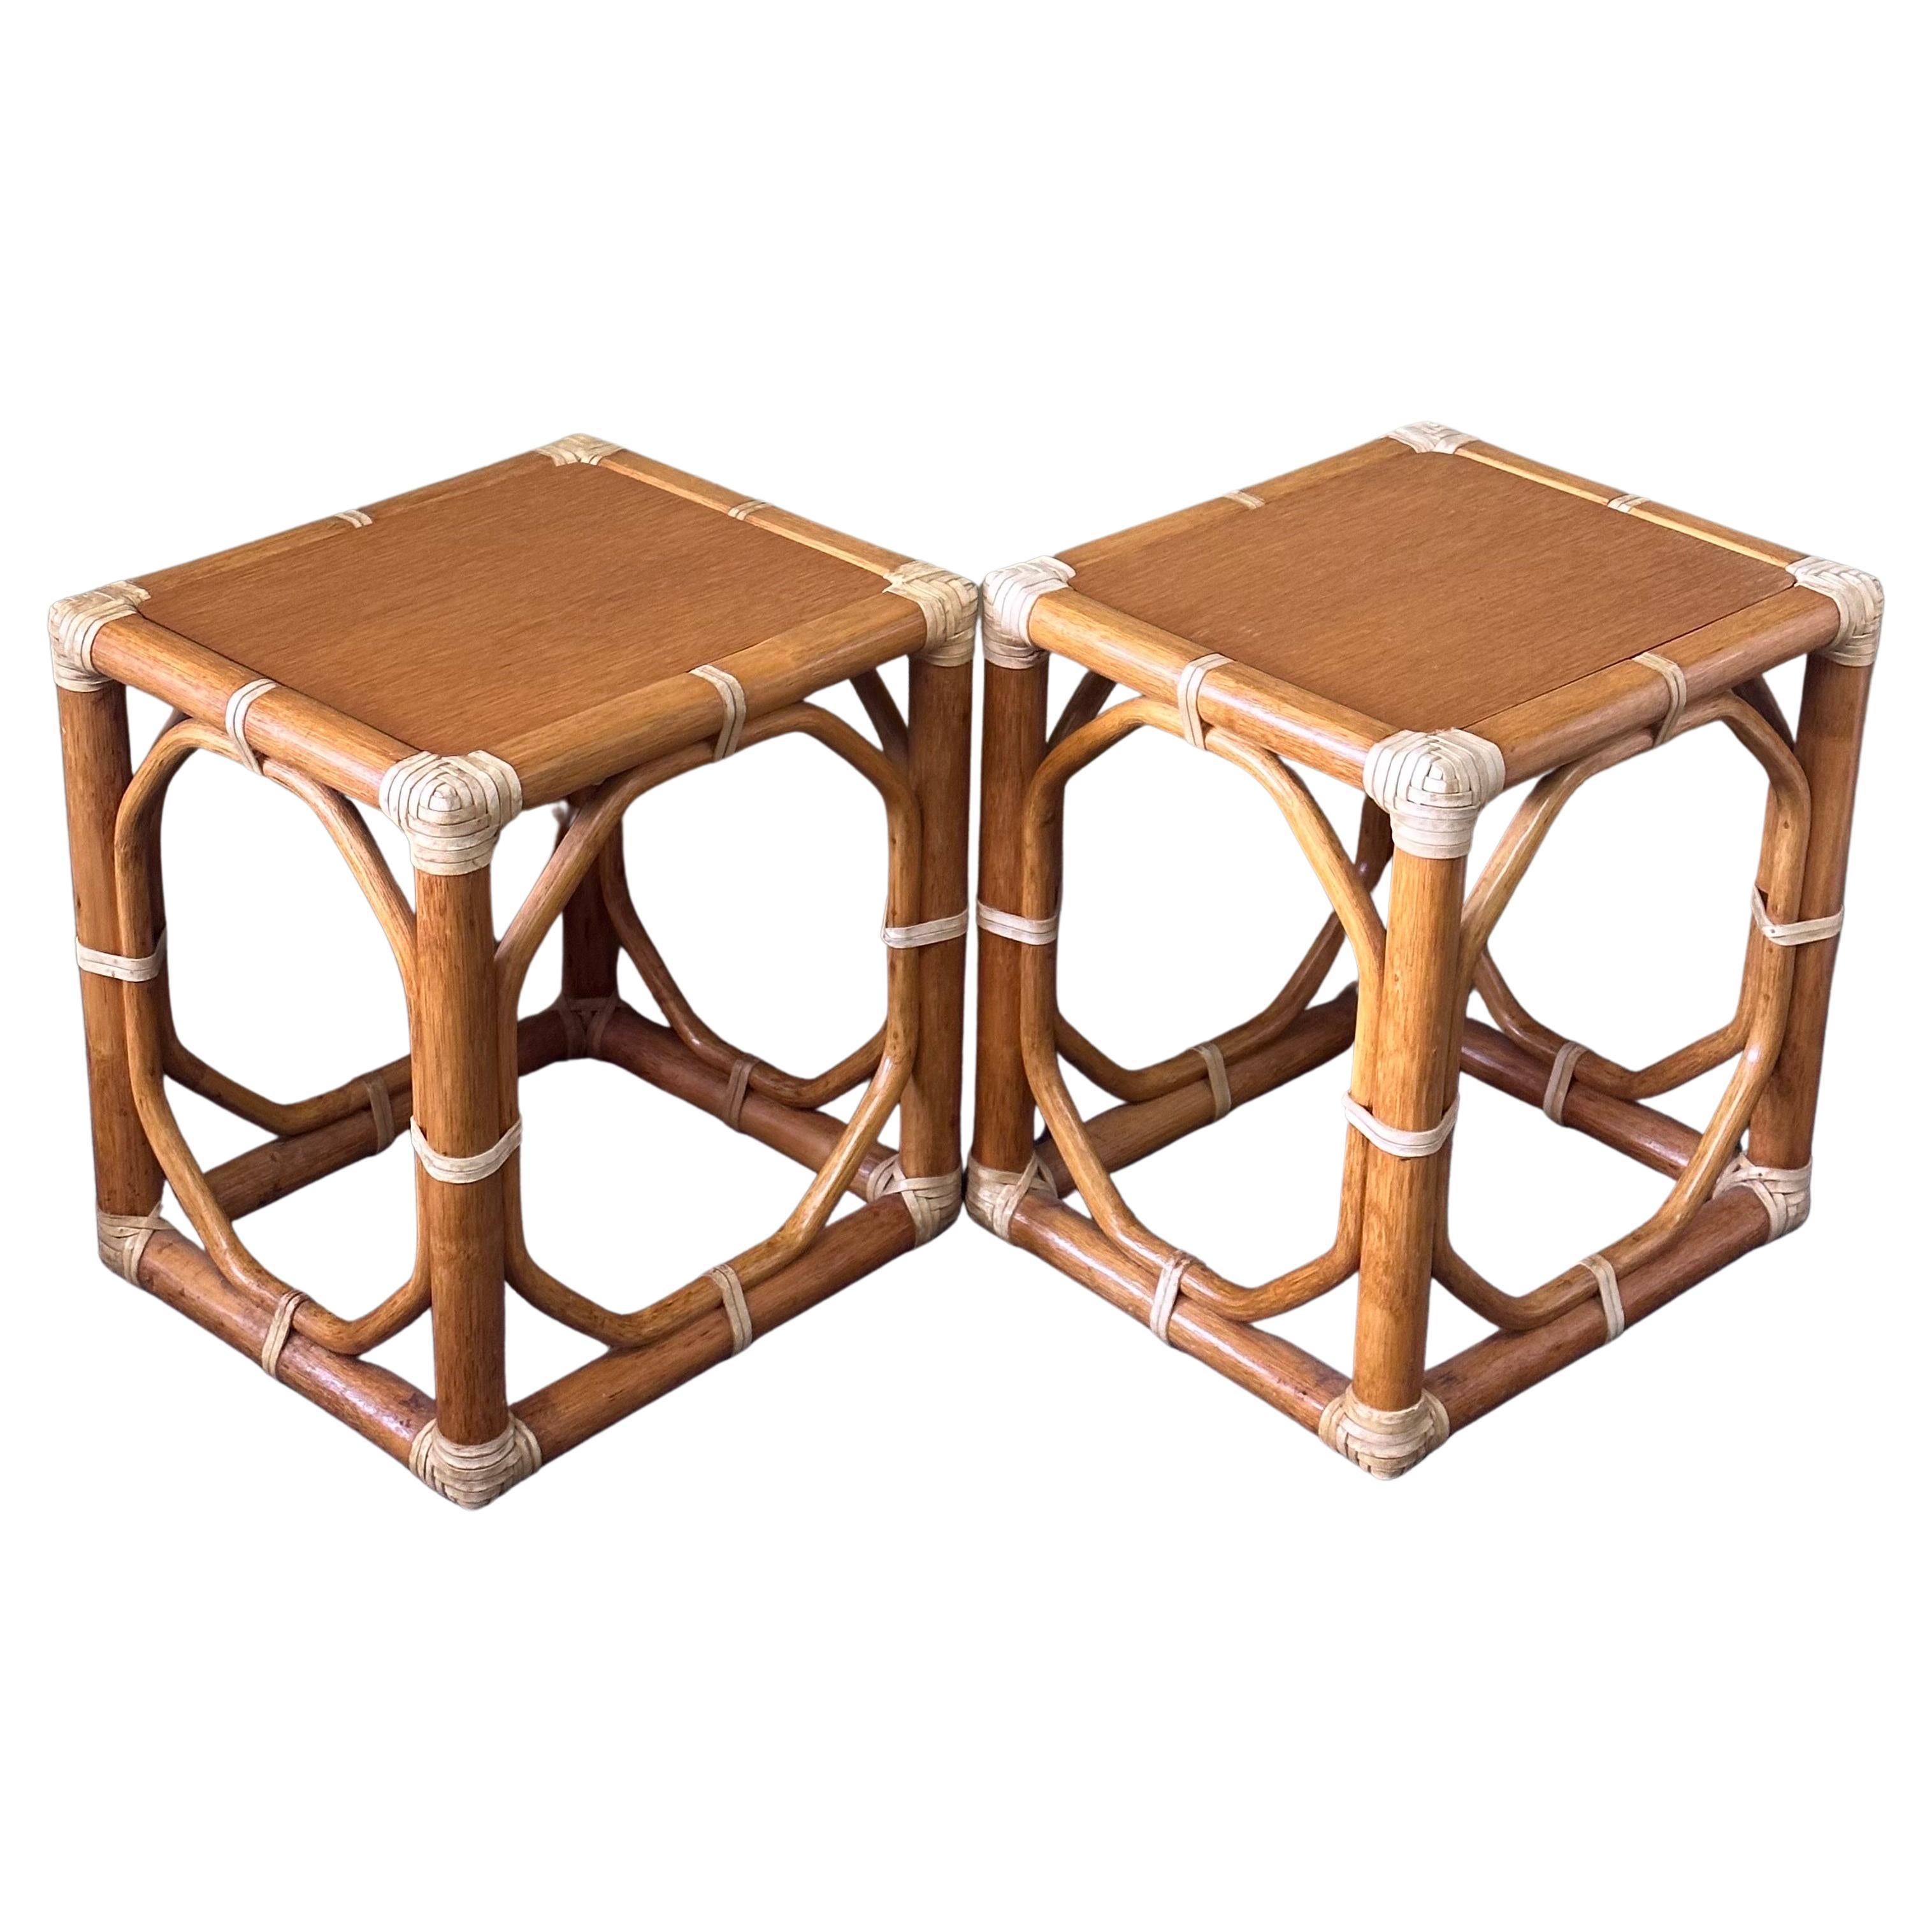 A nice pair of oak and rattan side tables / stools by McGuire Furniture Co. of San Francisco, circa 1970s. These tables are difficult to find and are in very good vintage condition. Each one measures 16